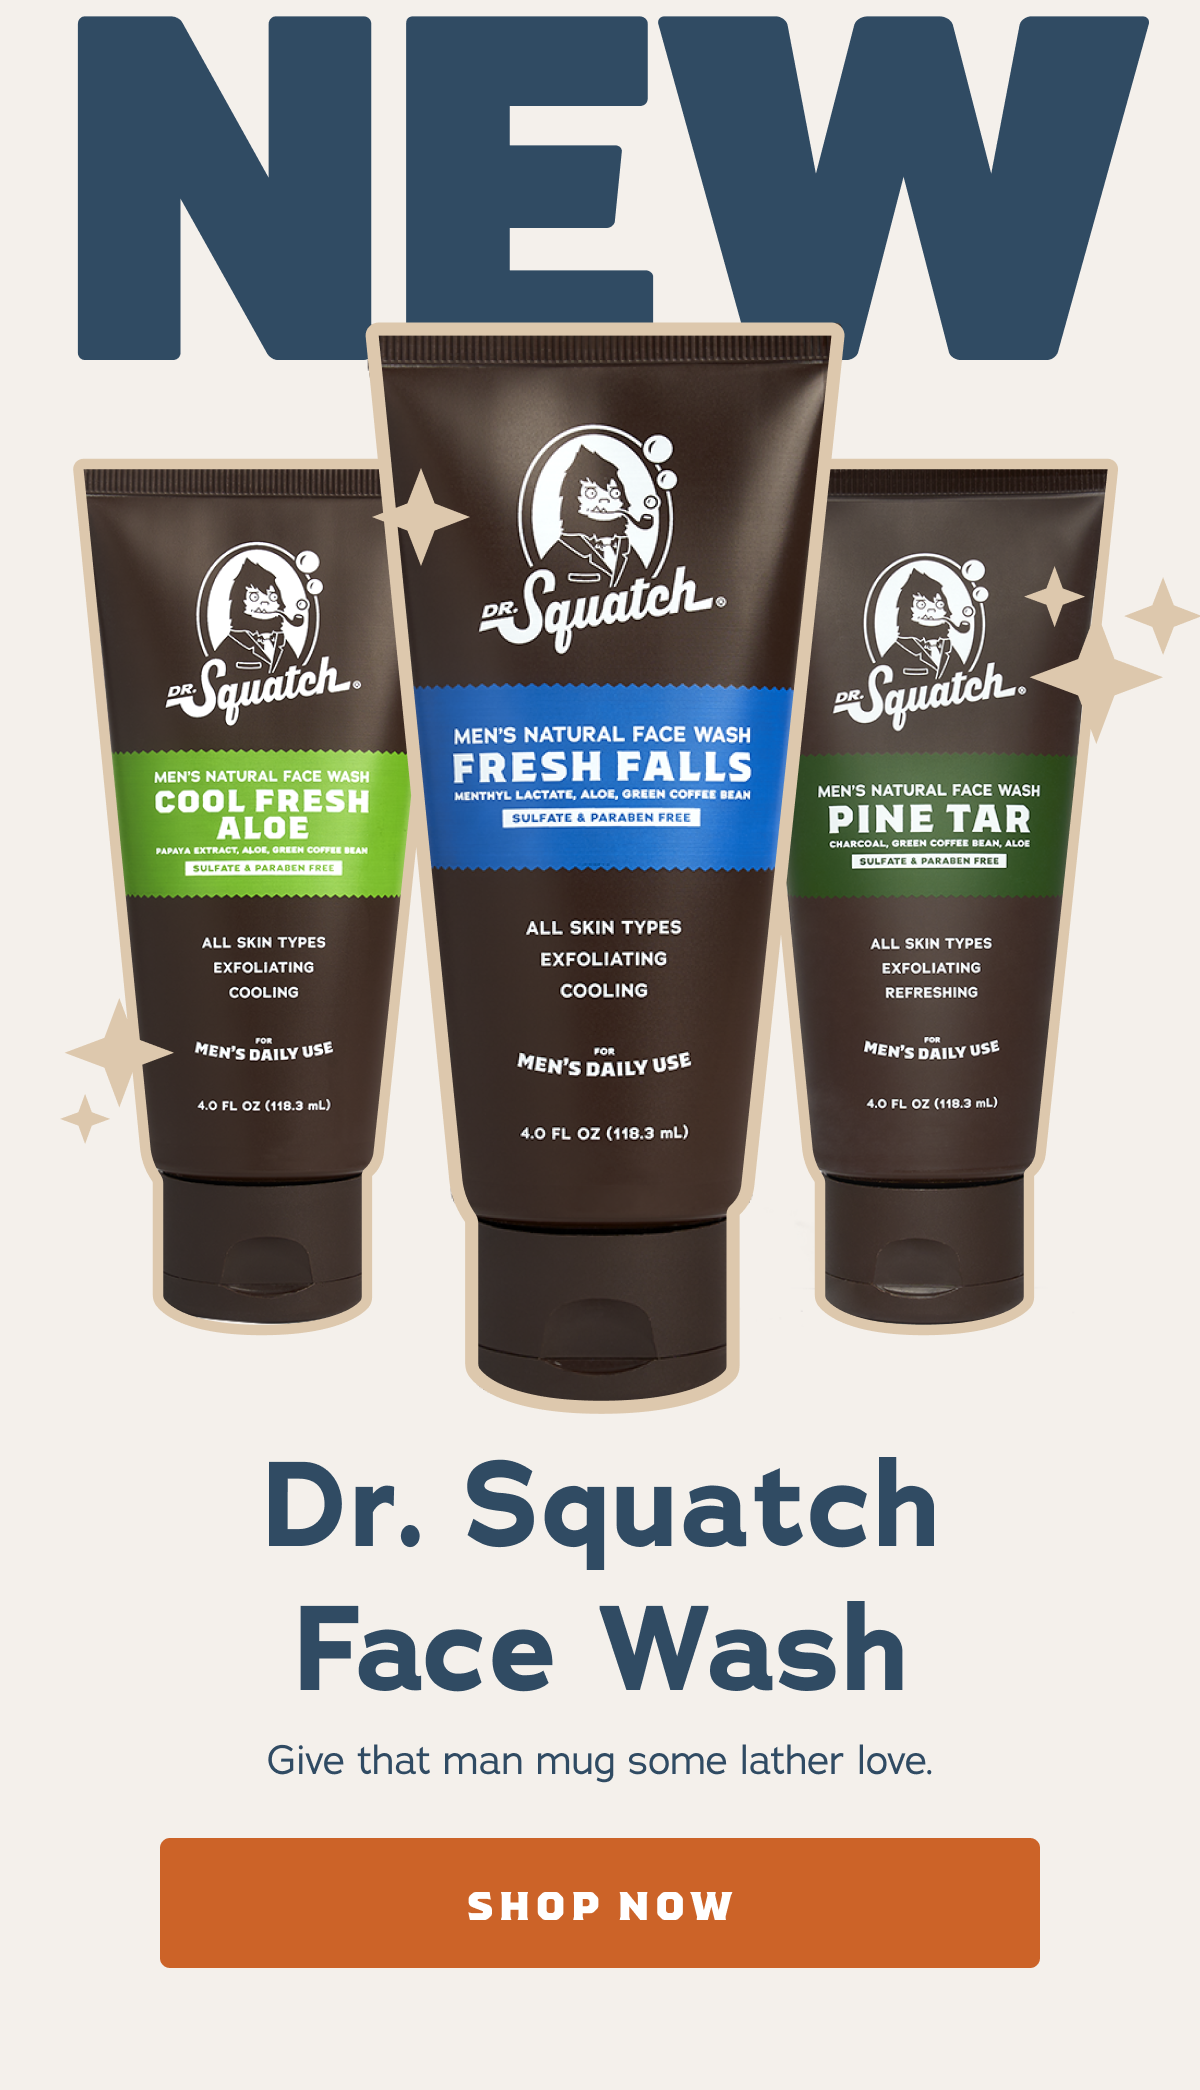 NEW DROP: Dr. Squatch Face Wash Get yours today!